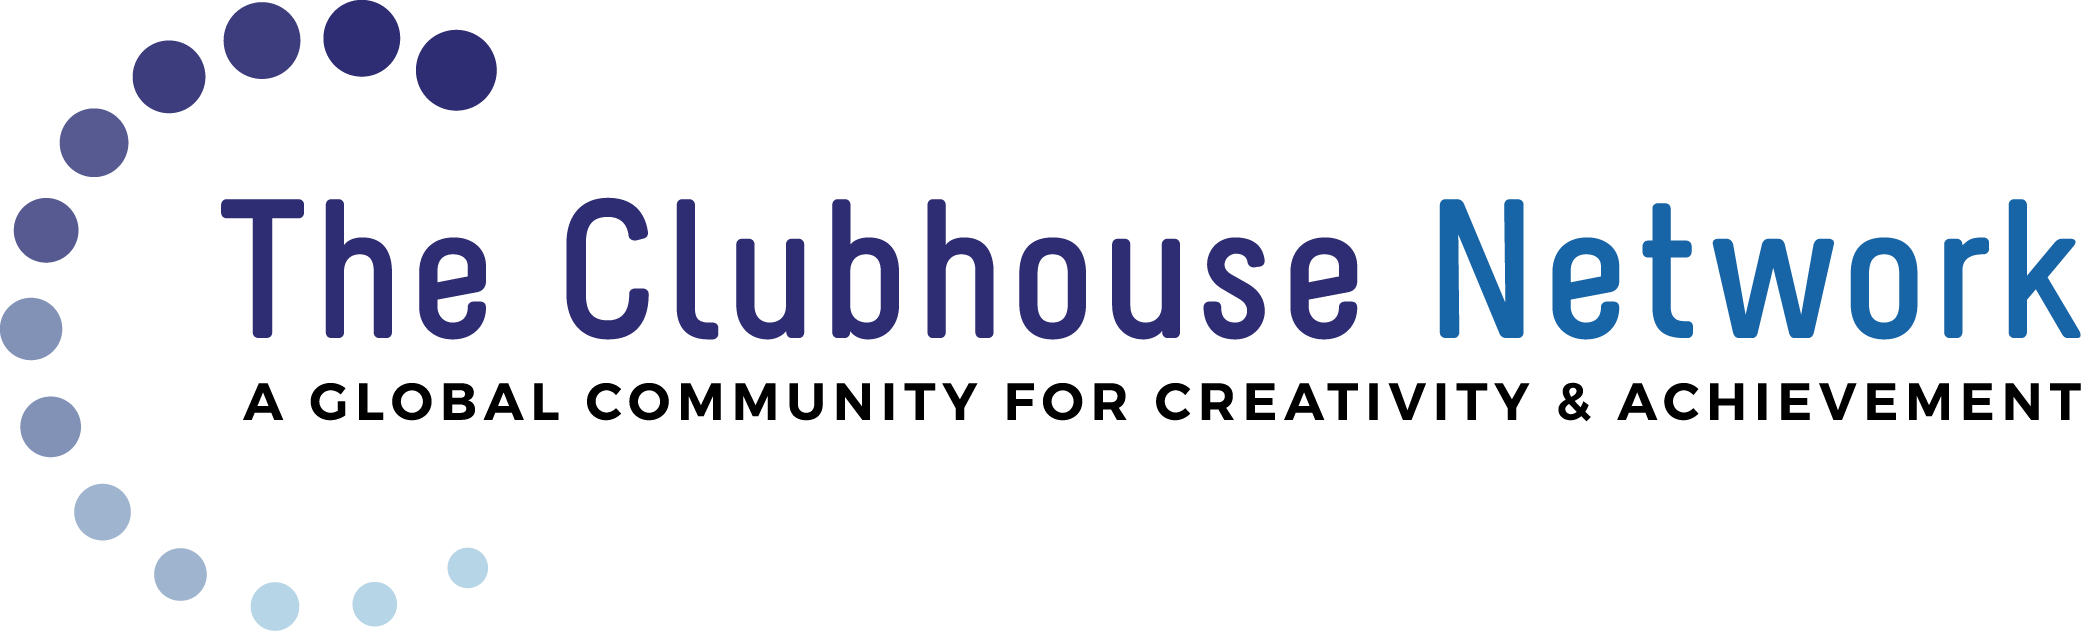 The Clubhouse Network supports Howard and Evanston Community Center in providing Rogers Park teens with the tools and support they need to develop their interests.